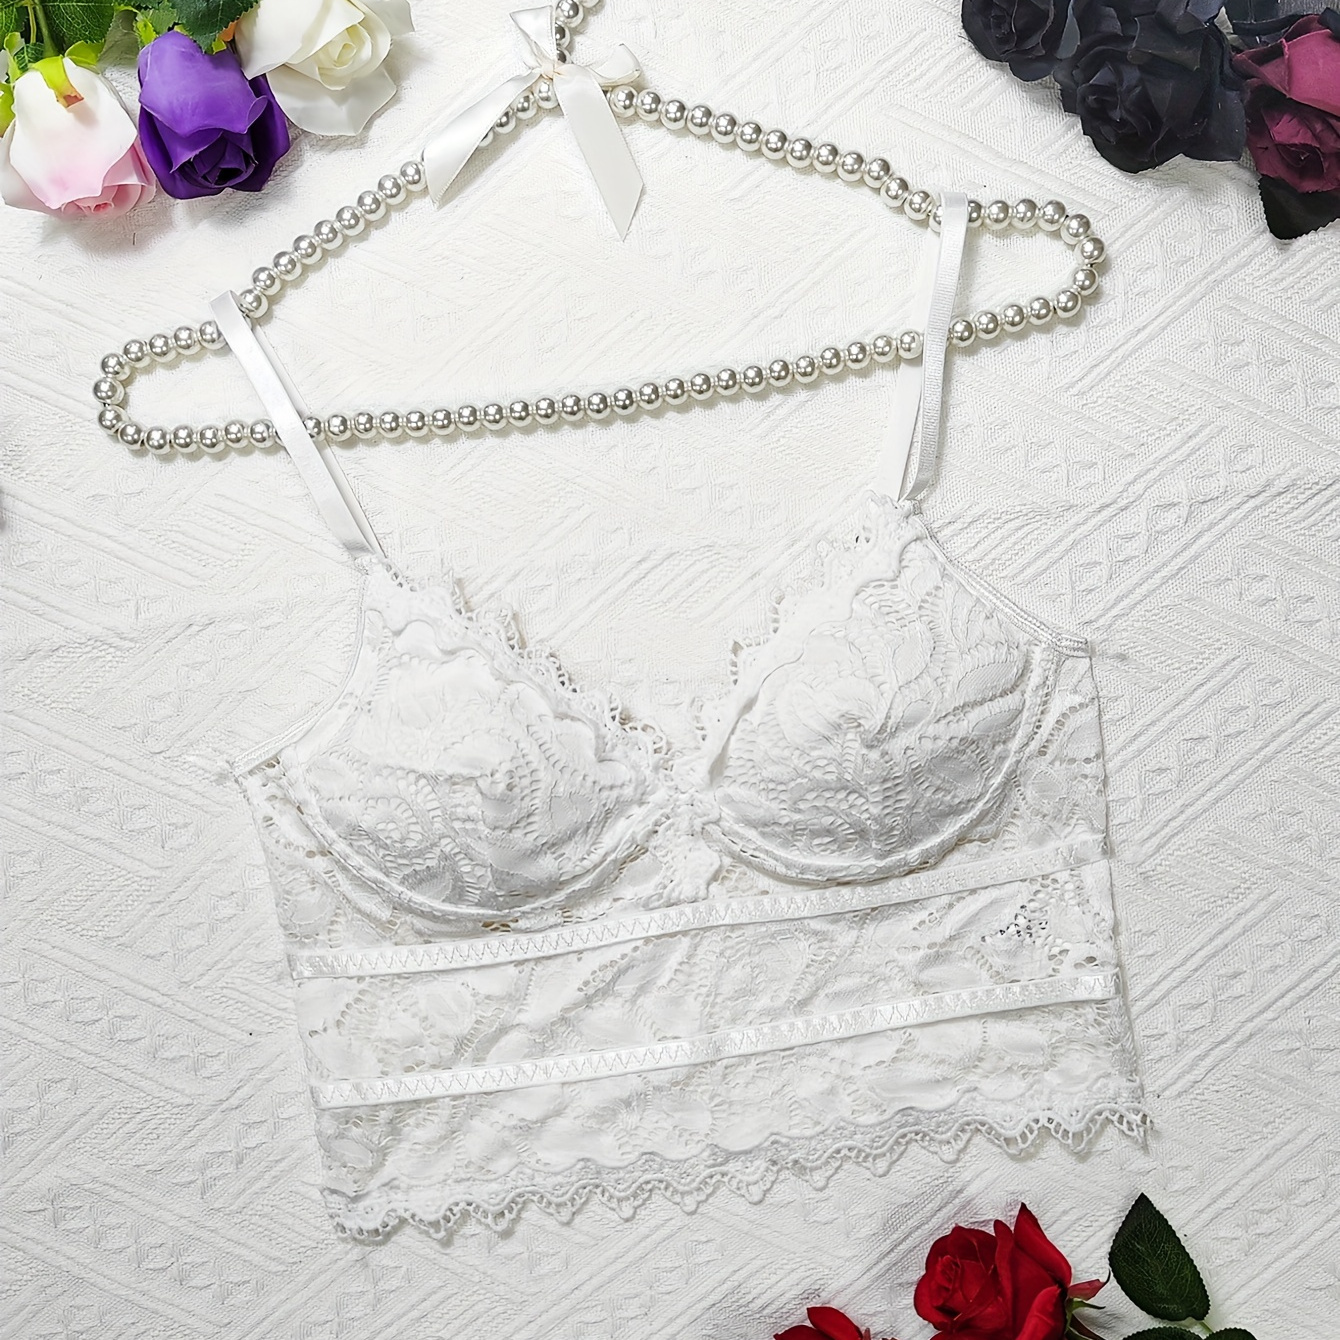 Xmarks Lace Camisole, Romantic Lace Bralettes V Neck Lace Half Cami Bra  Spaghetti Strap Crop Top With Pad for Women Girls